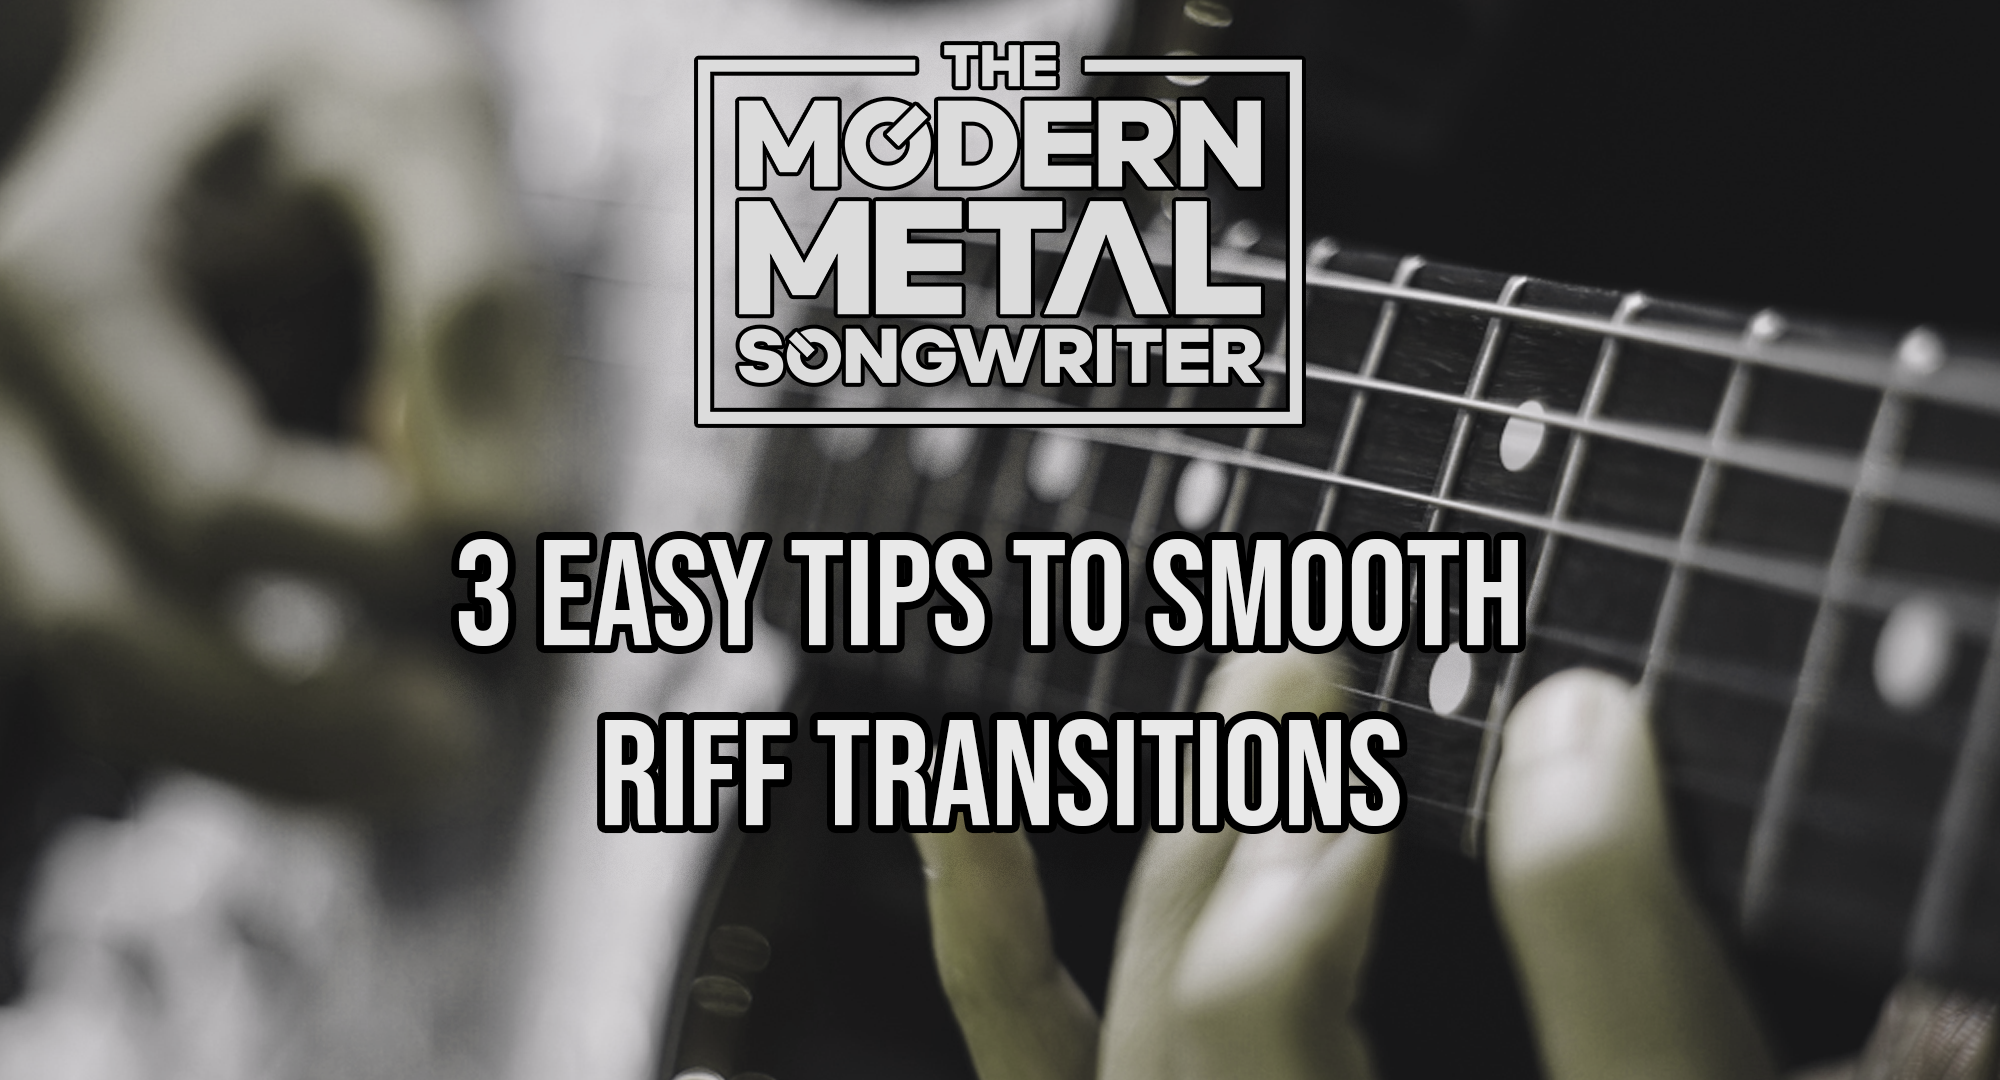 3-Easy-Tips-to-Smooth-Riff-Transitions ModernMetalSongwriter graphic